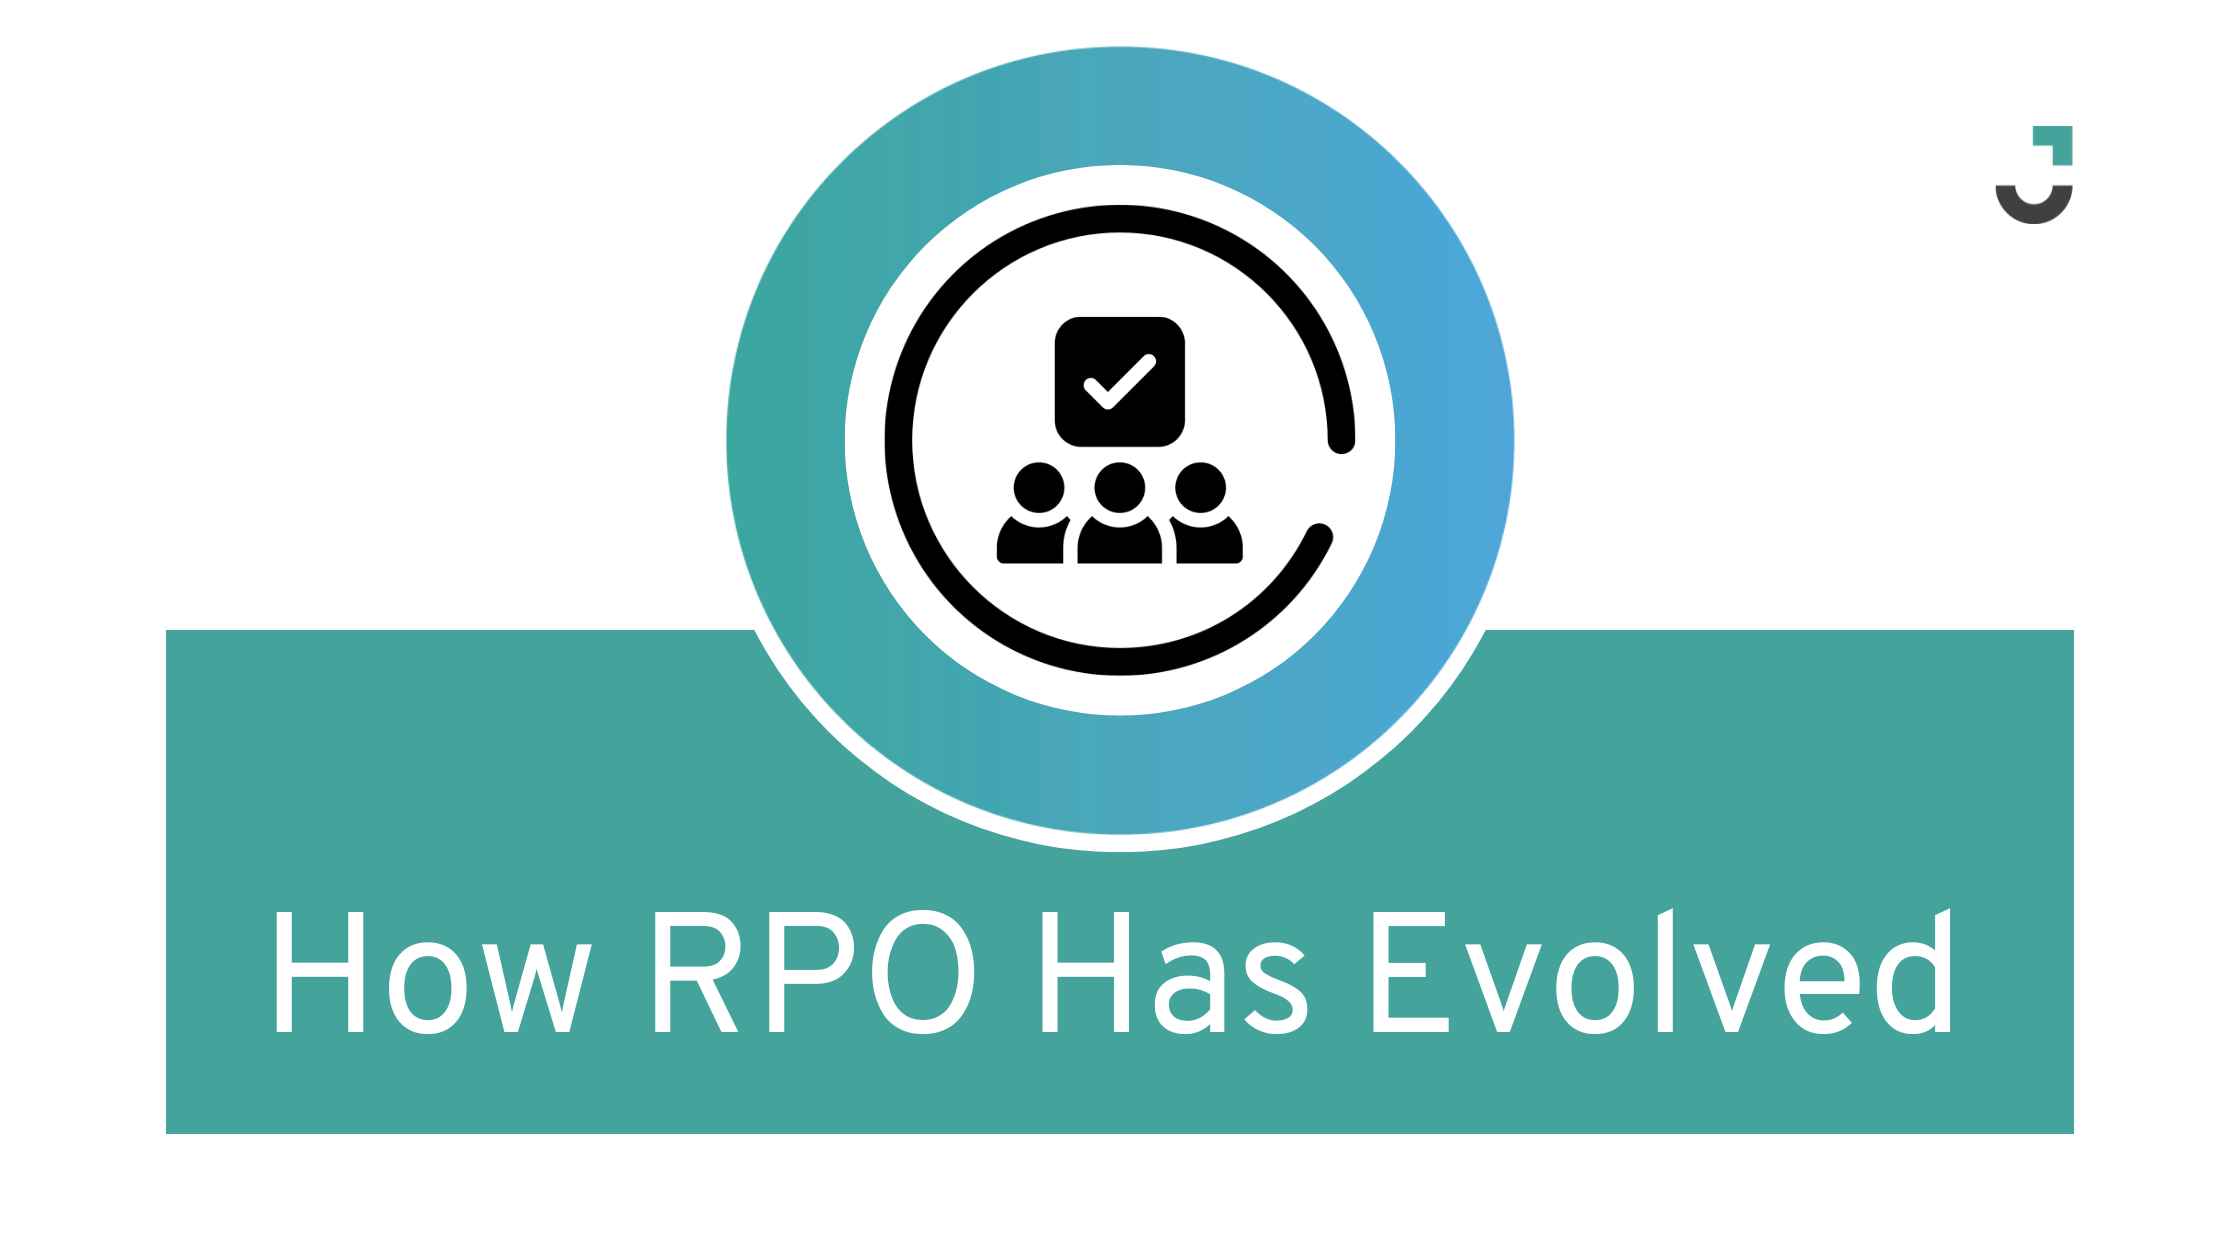 How RPO Has Evolved